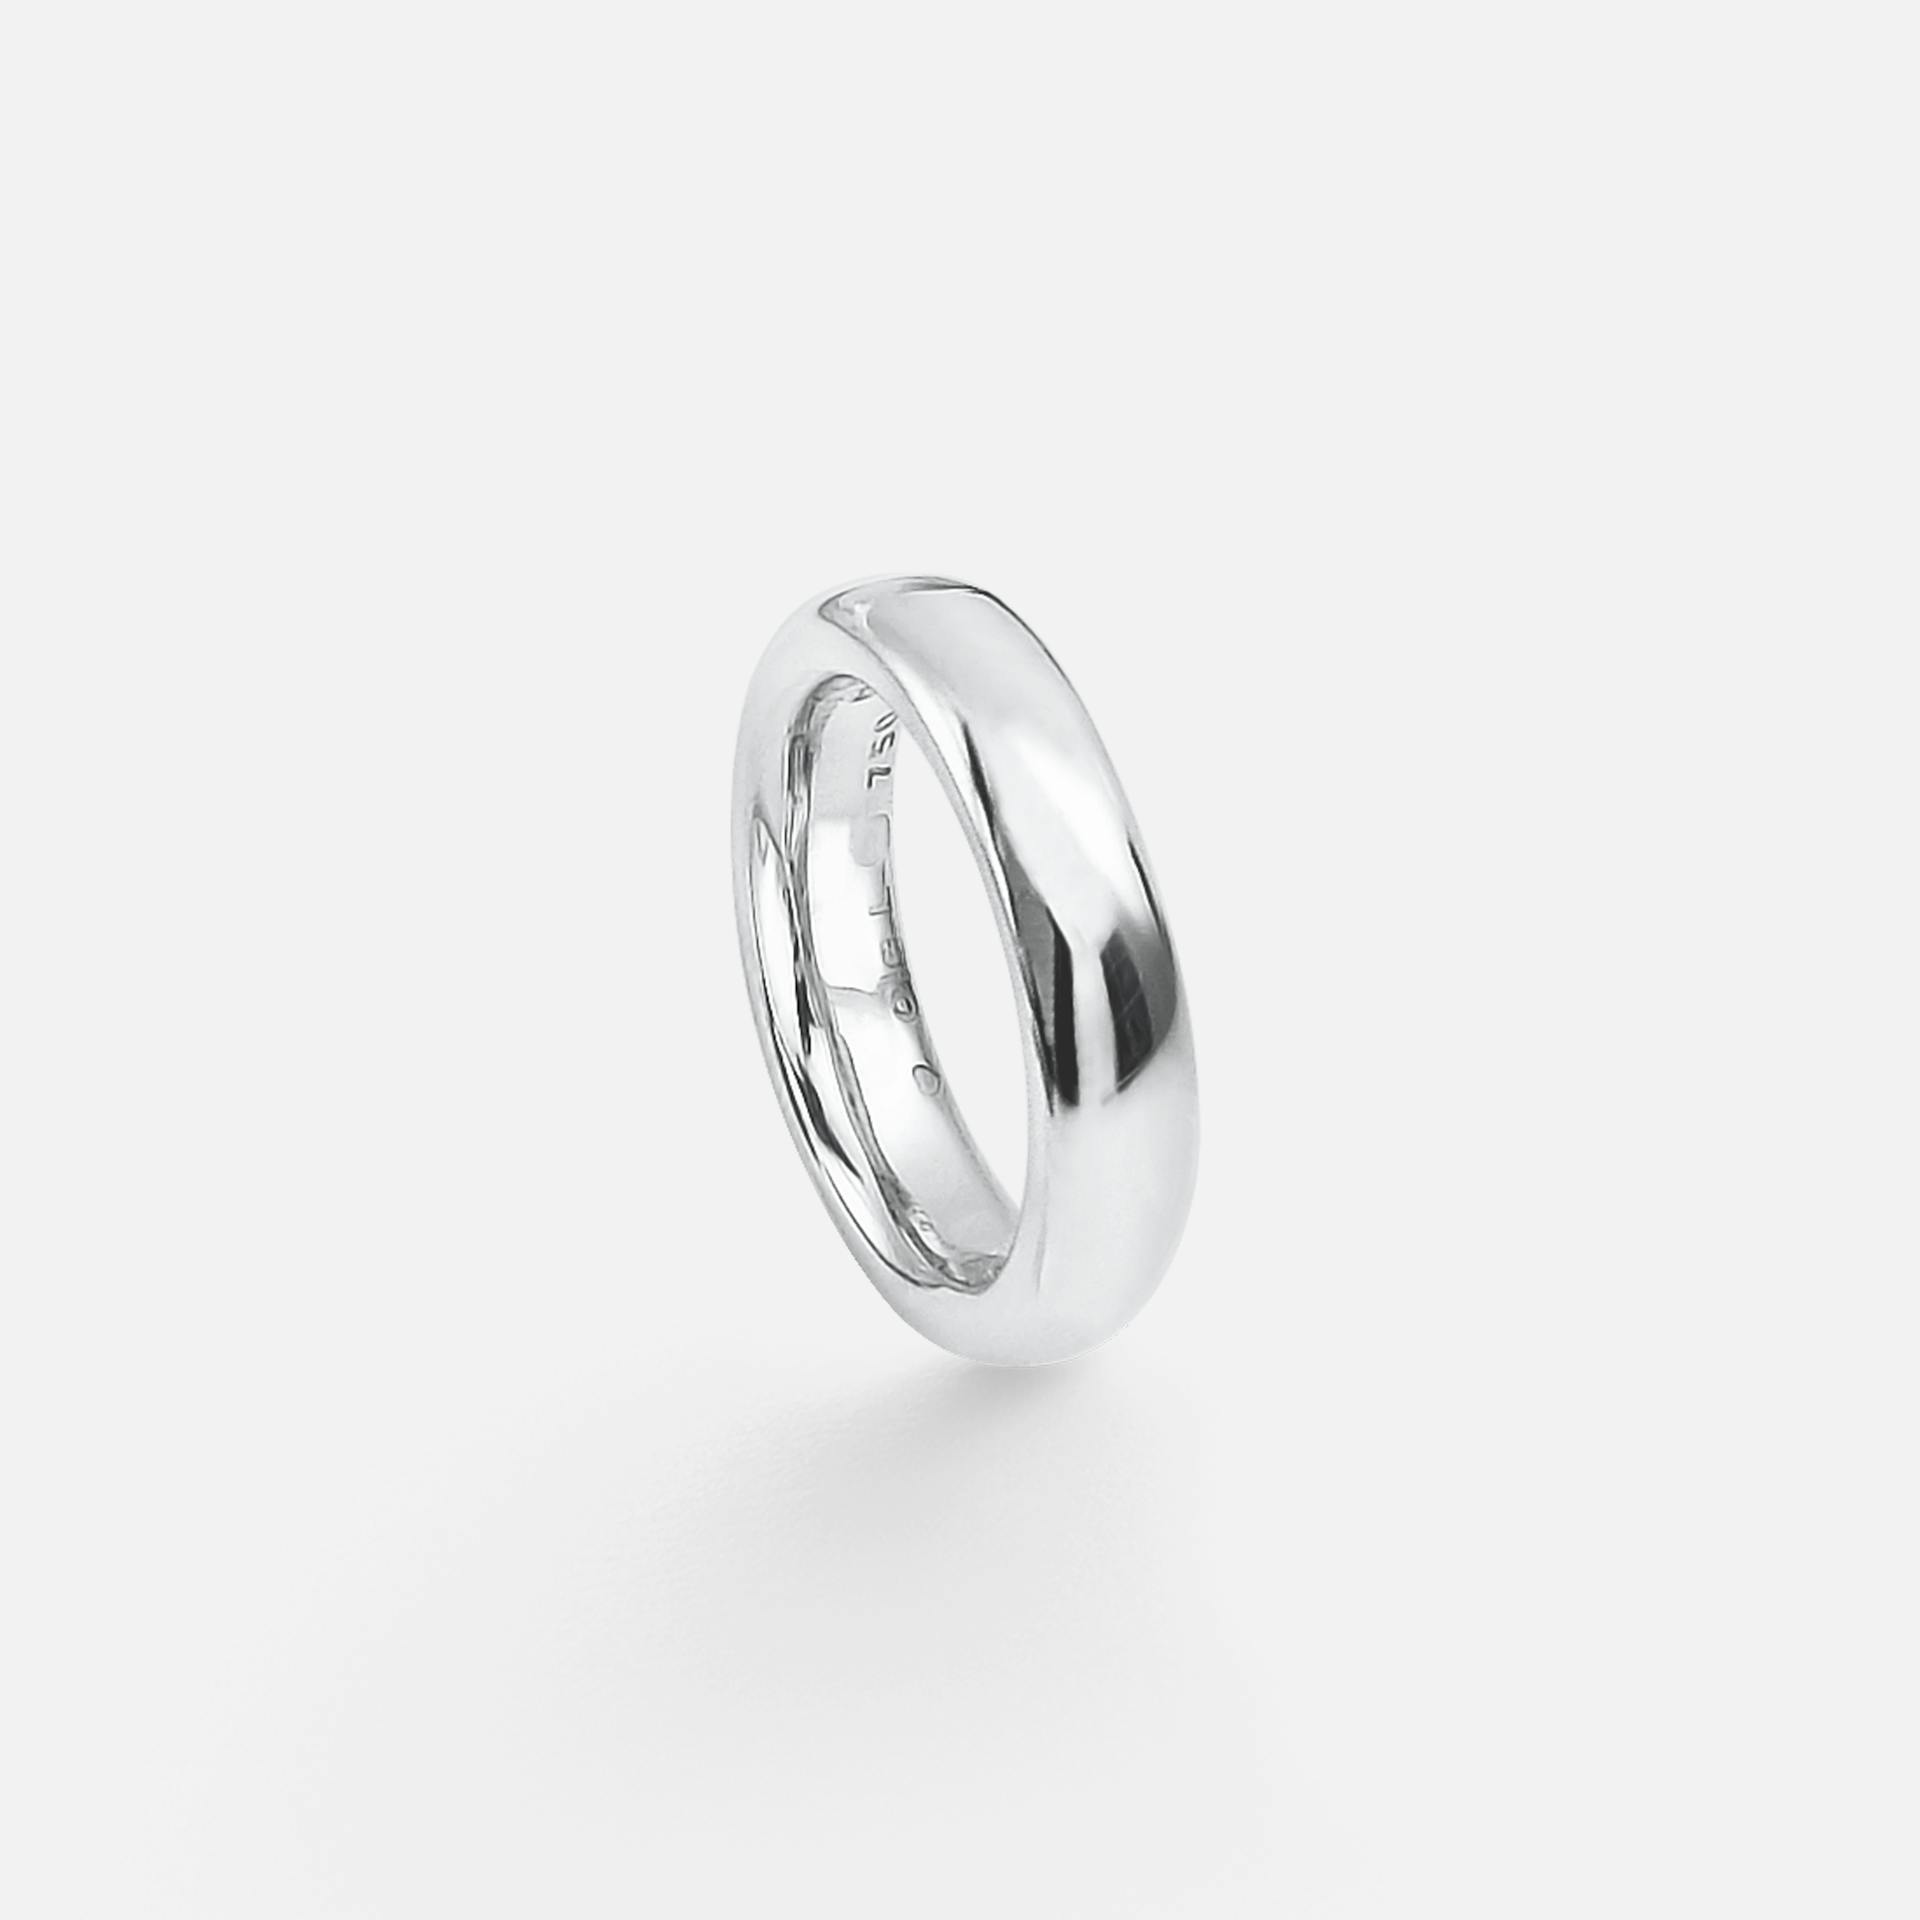 The Ring mens 5mm 18k polished white gold